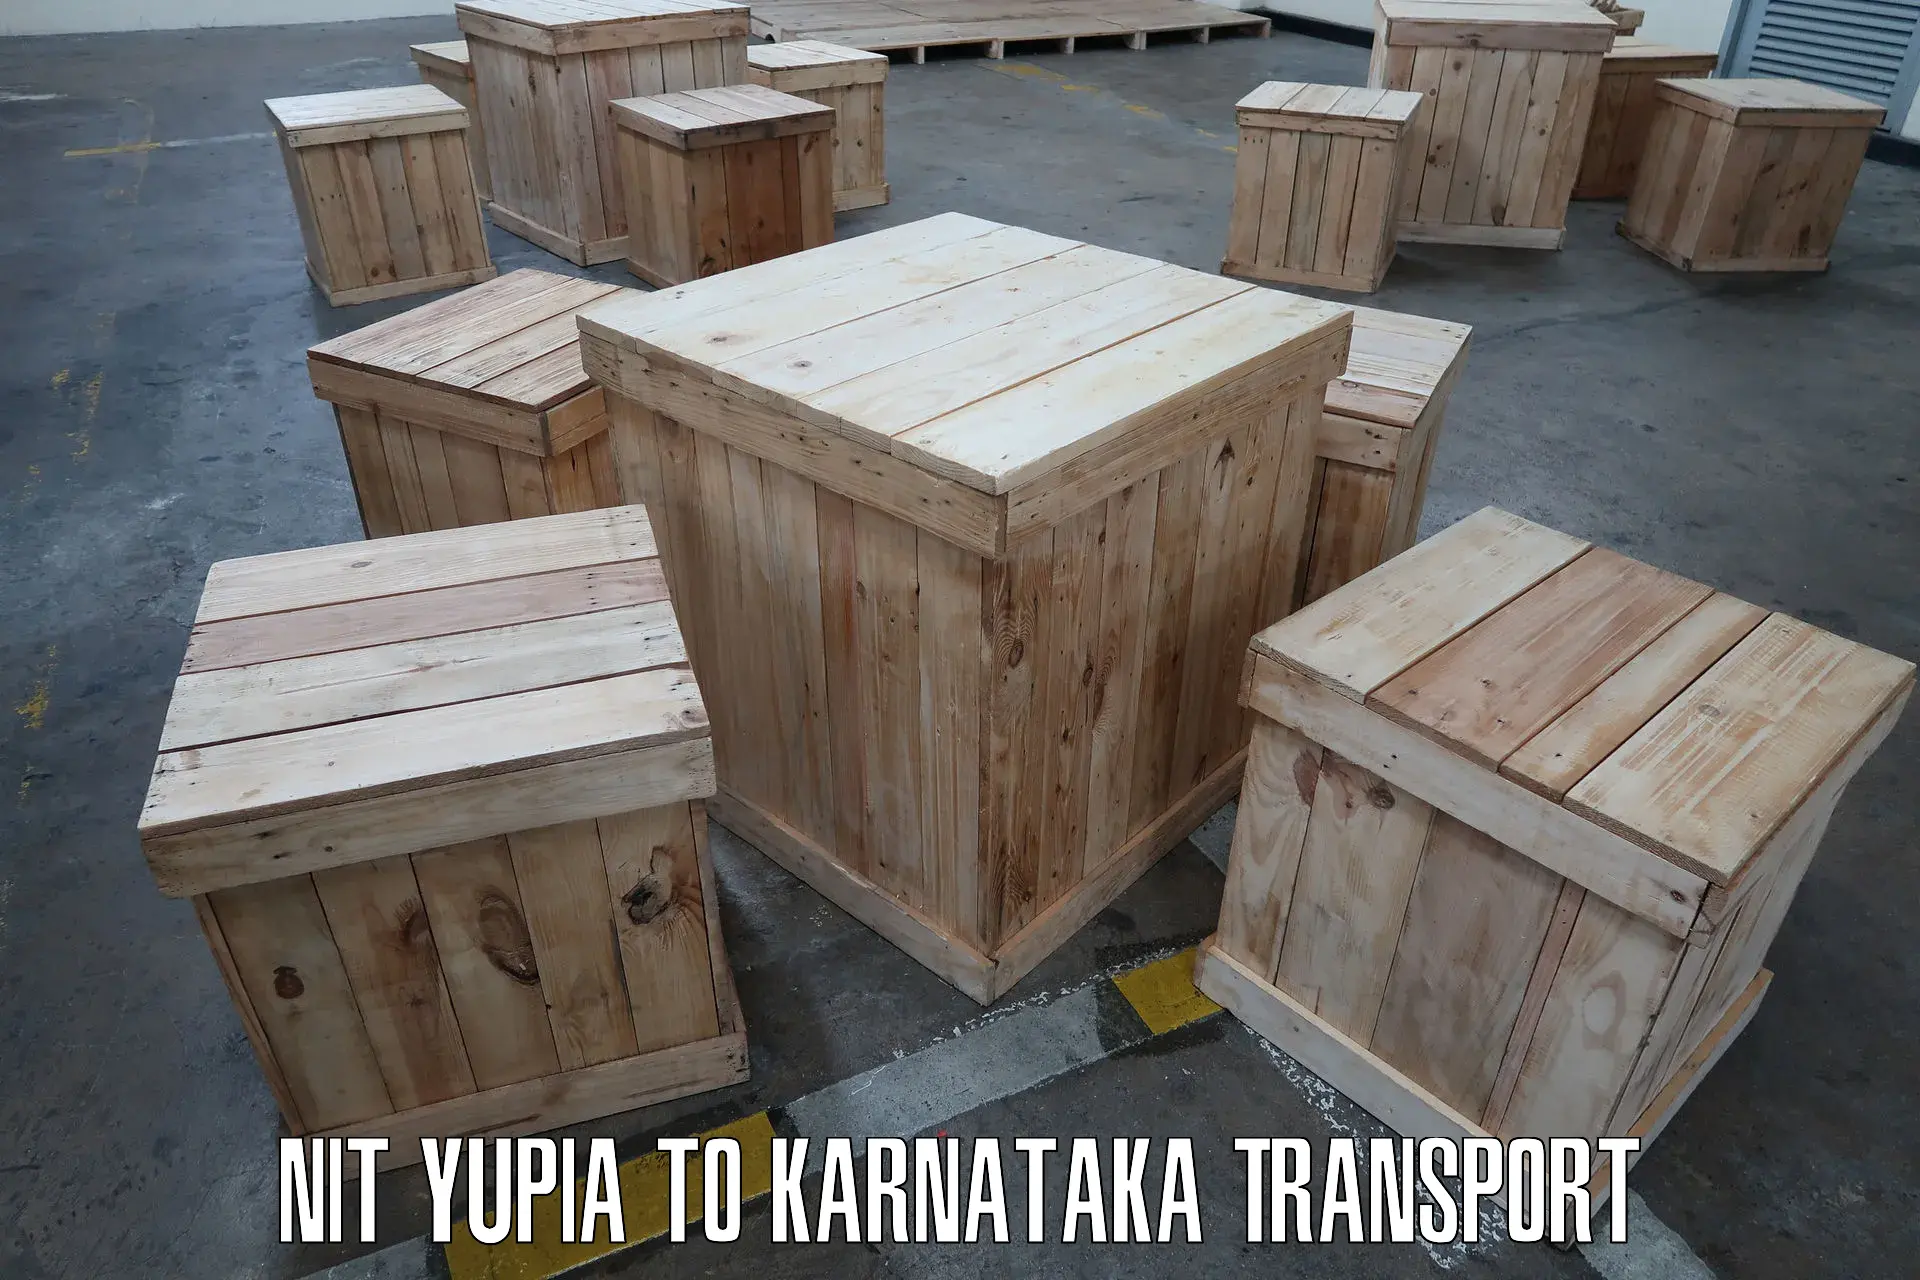 Express transport services in NIT Yupia to Kittur